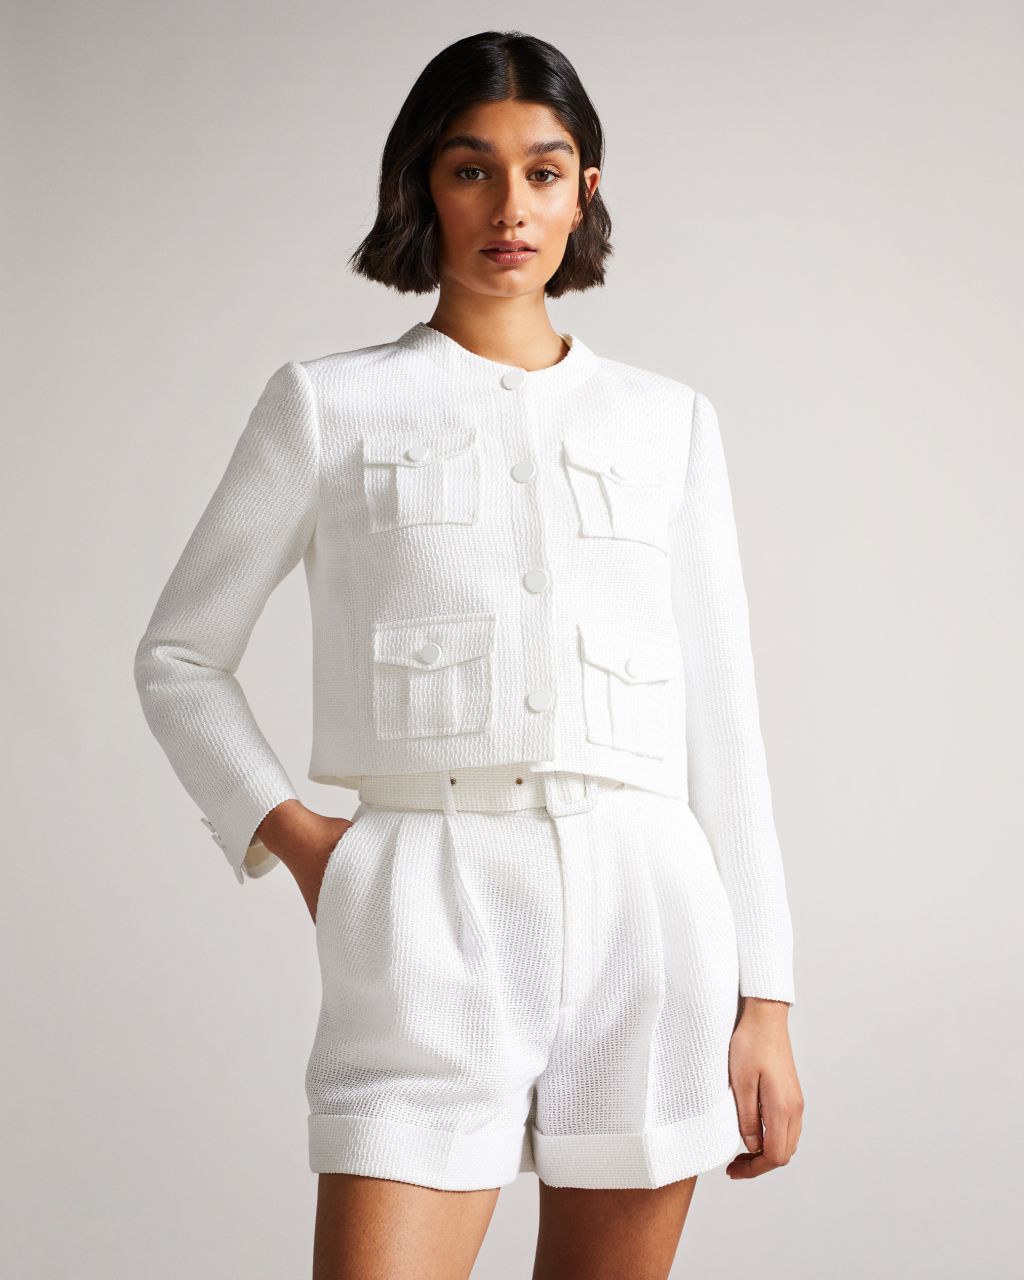 Ted Baker Women's Cropped Cargo Jacket in White, Alera, Cotton